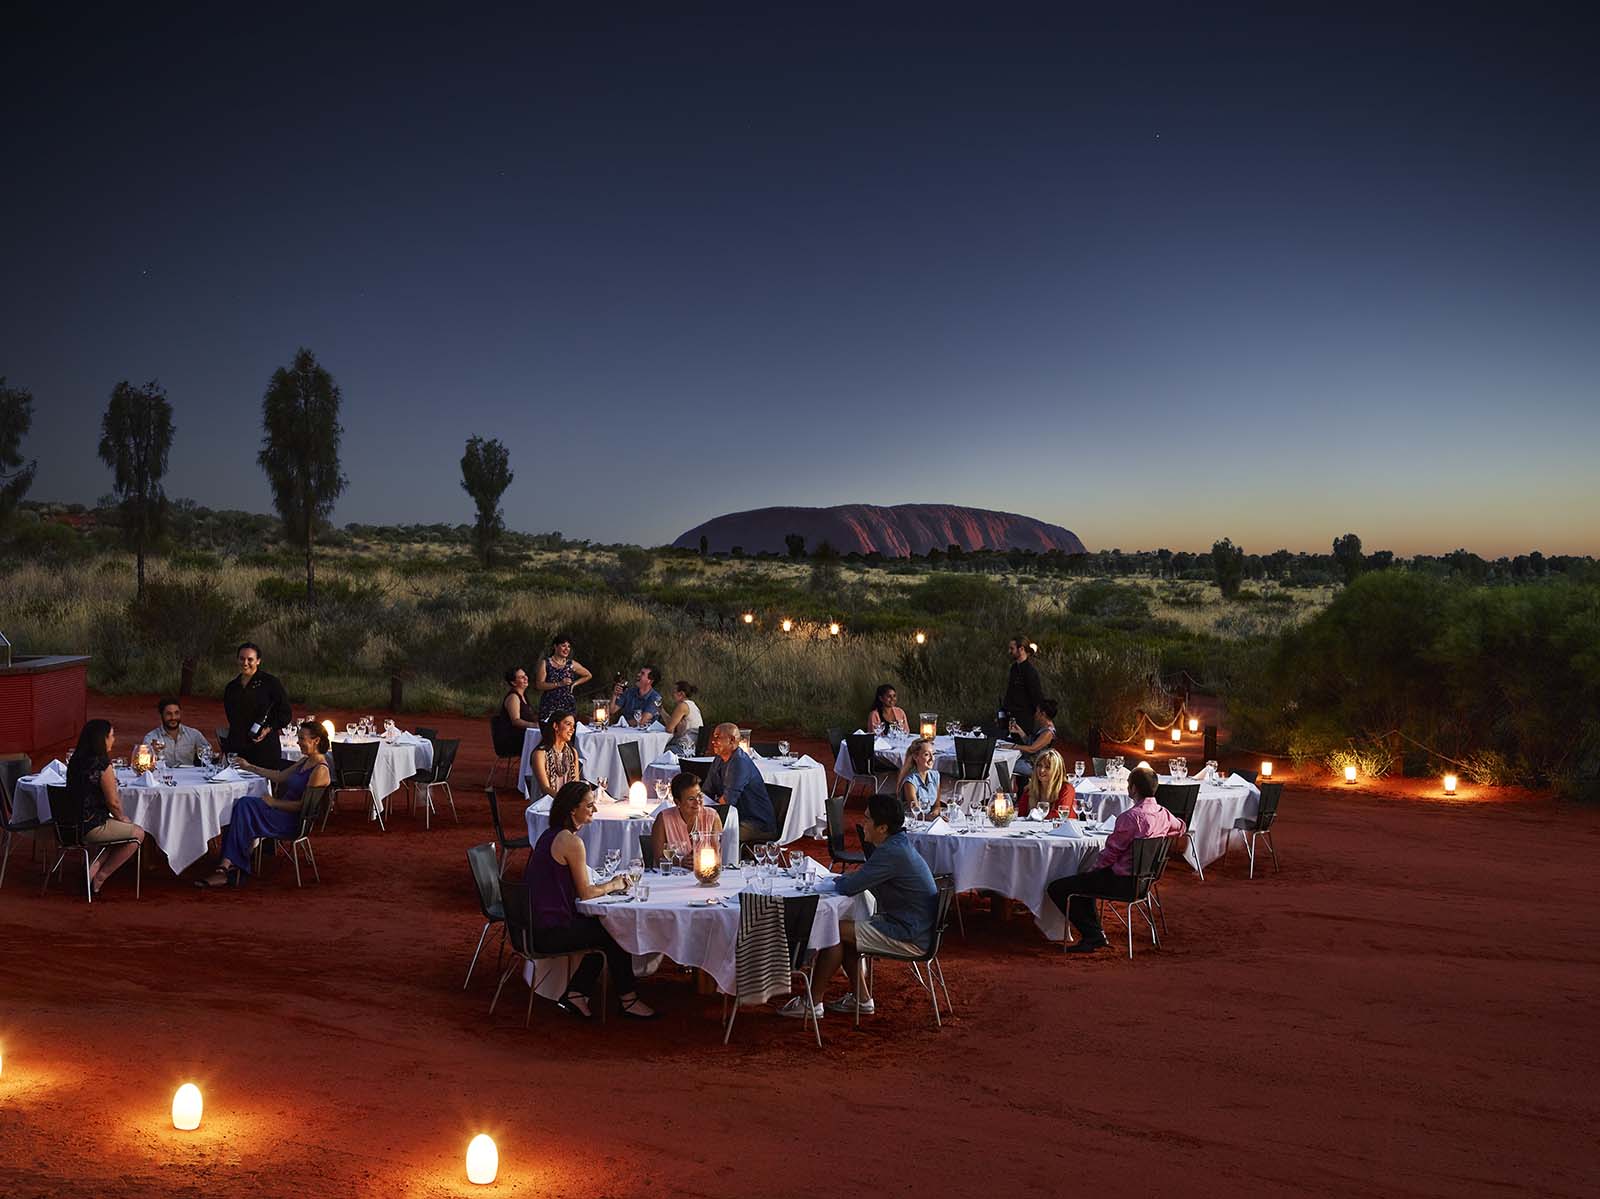 Sounds of Silence Dinner with a view of Uluru | 10 ways to see Uluru